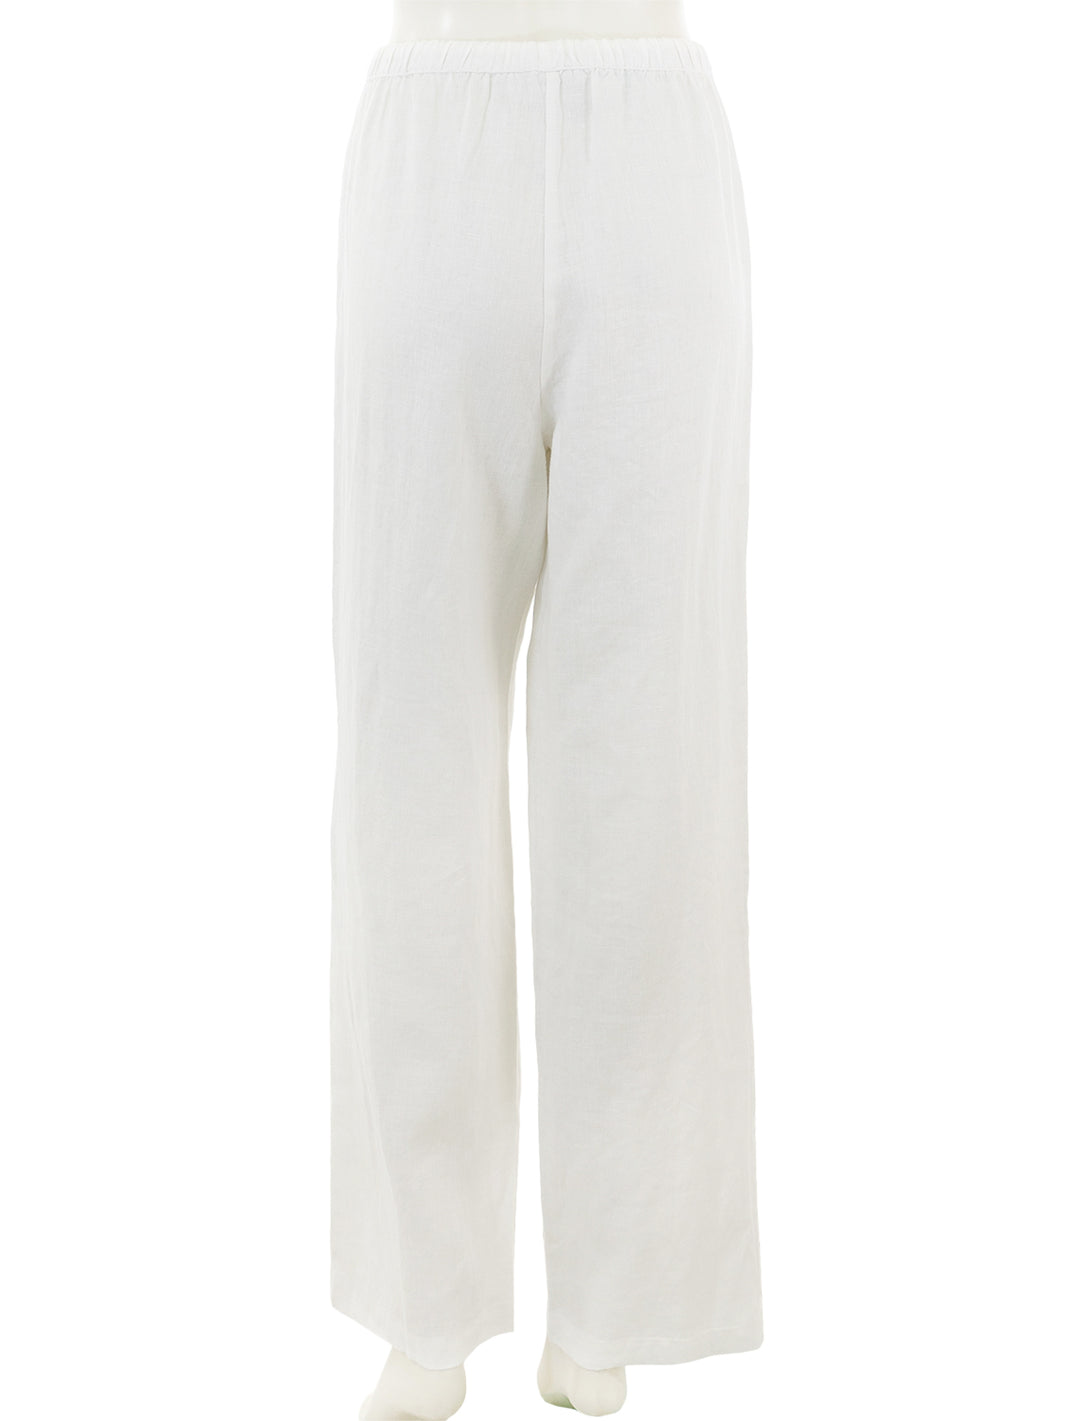 Back view of Rails' emmie linen pants in white.